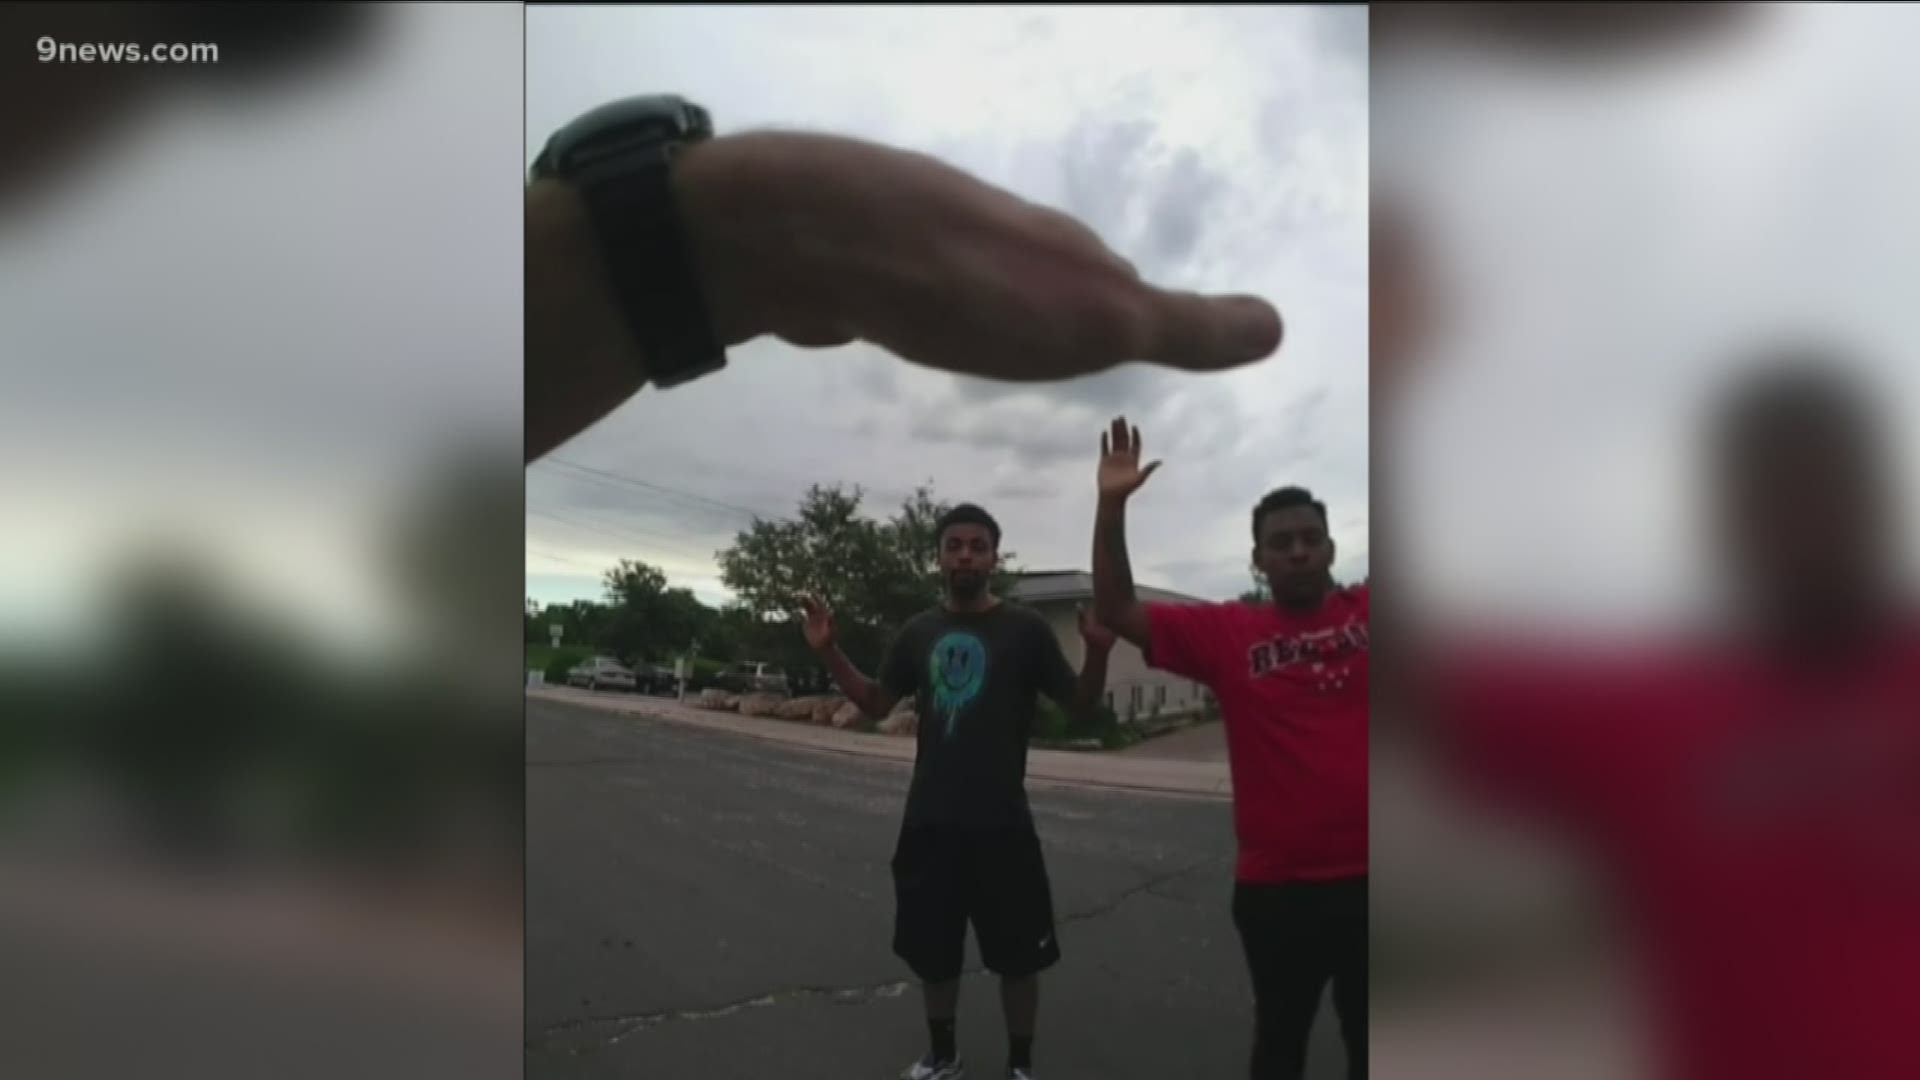 A grand jury has decided that Colorado Springs Police officers were justified in their use of force in the Aug. 3 fatal shooting of 19-year-old De’Von Bailey.